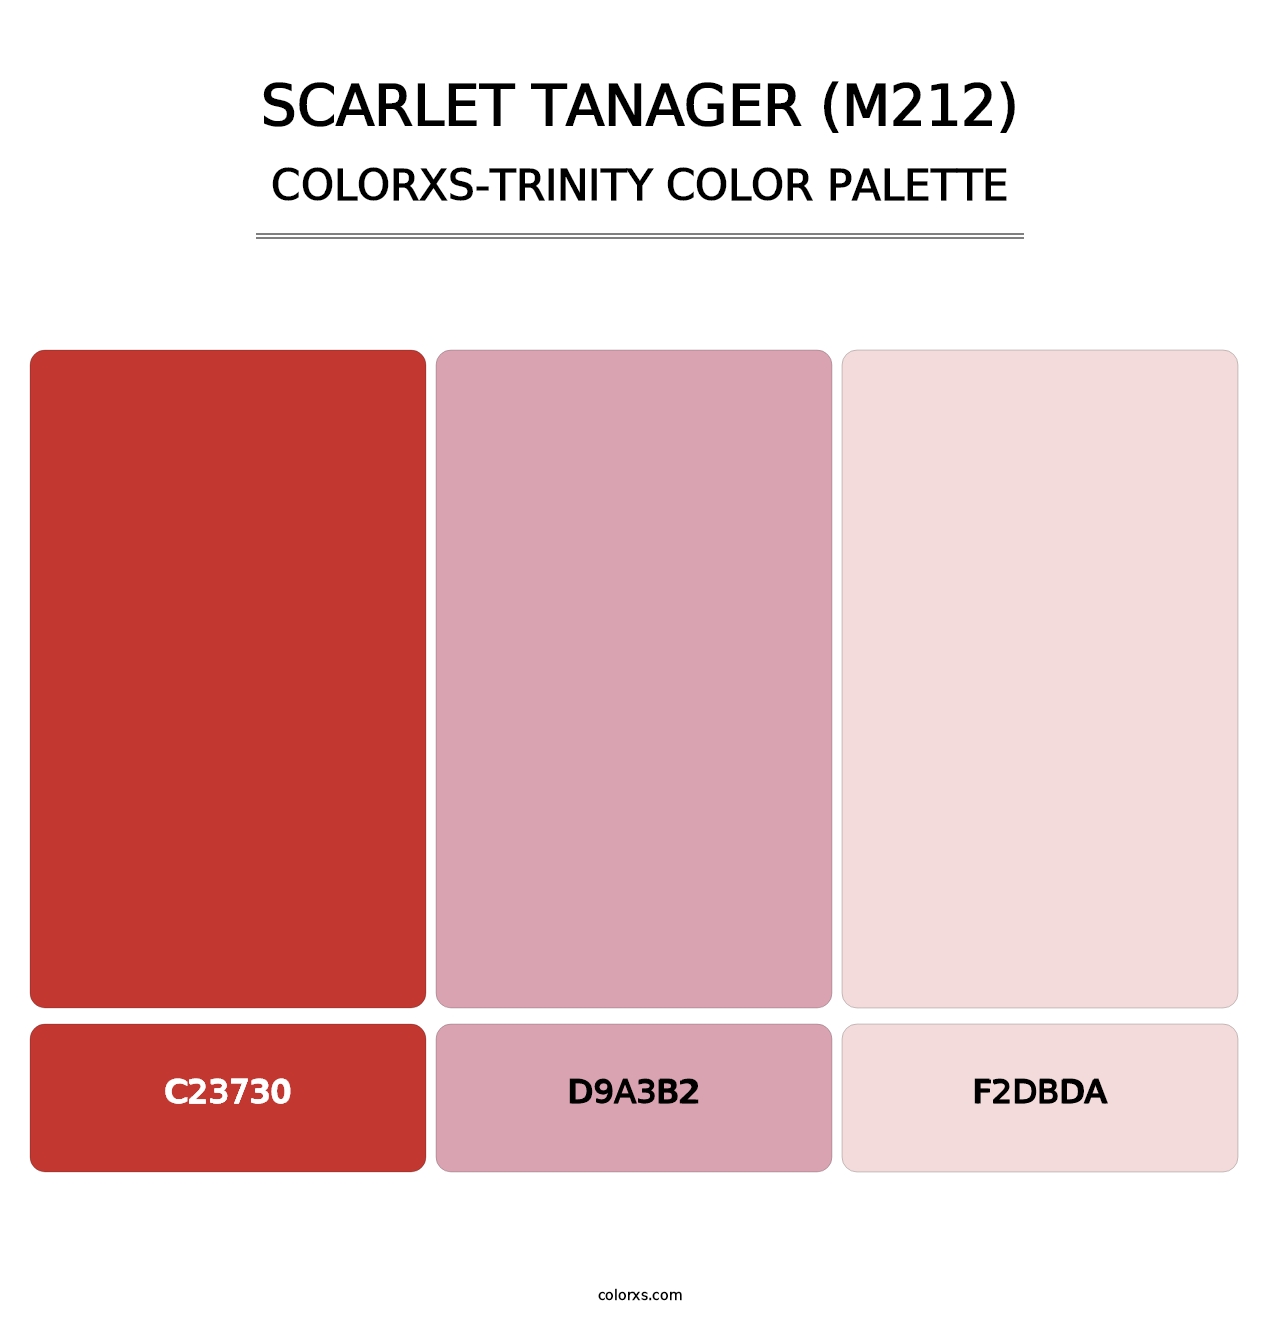 Scarlet Tanager (M212) - Colorxs Trinity Palette